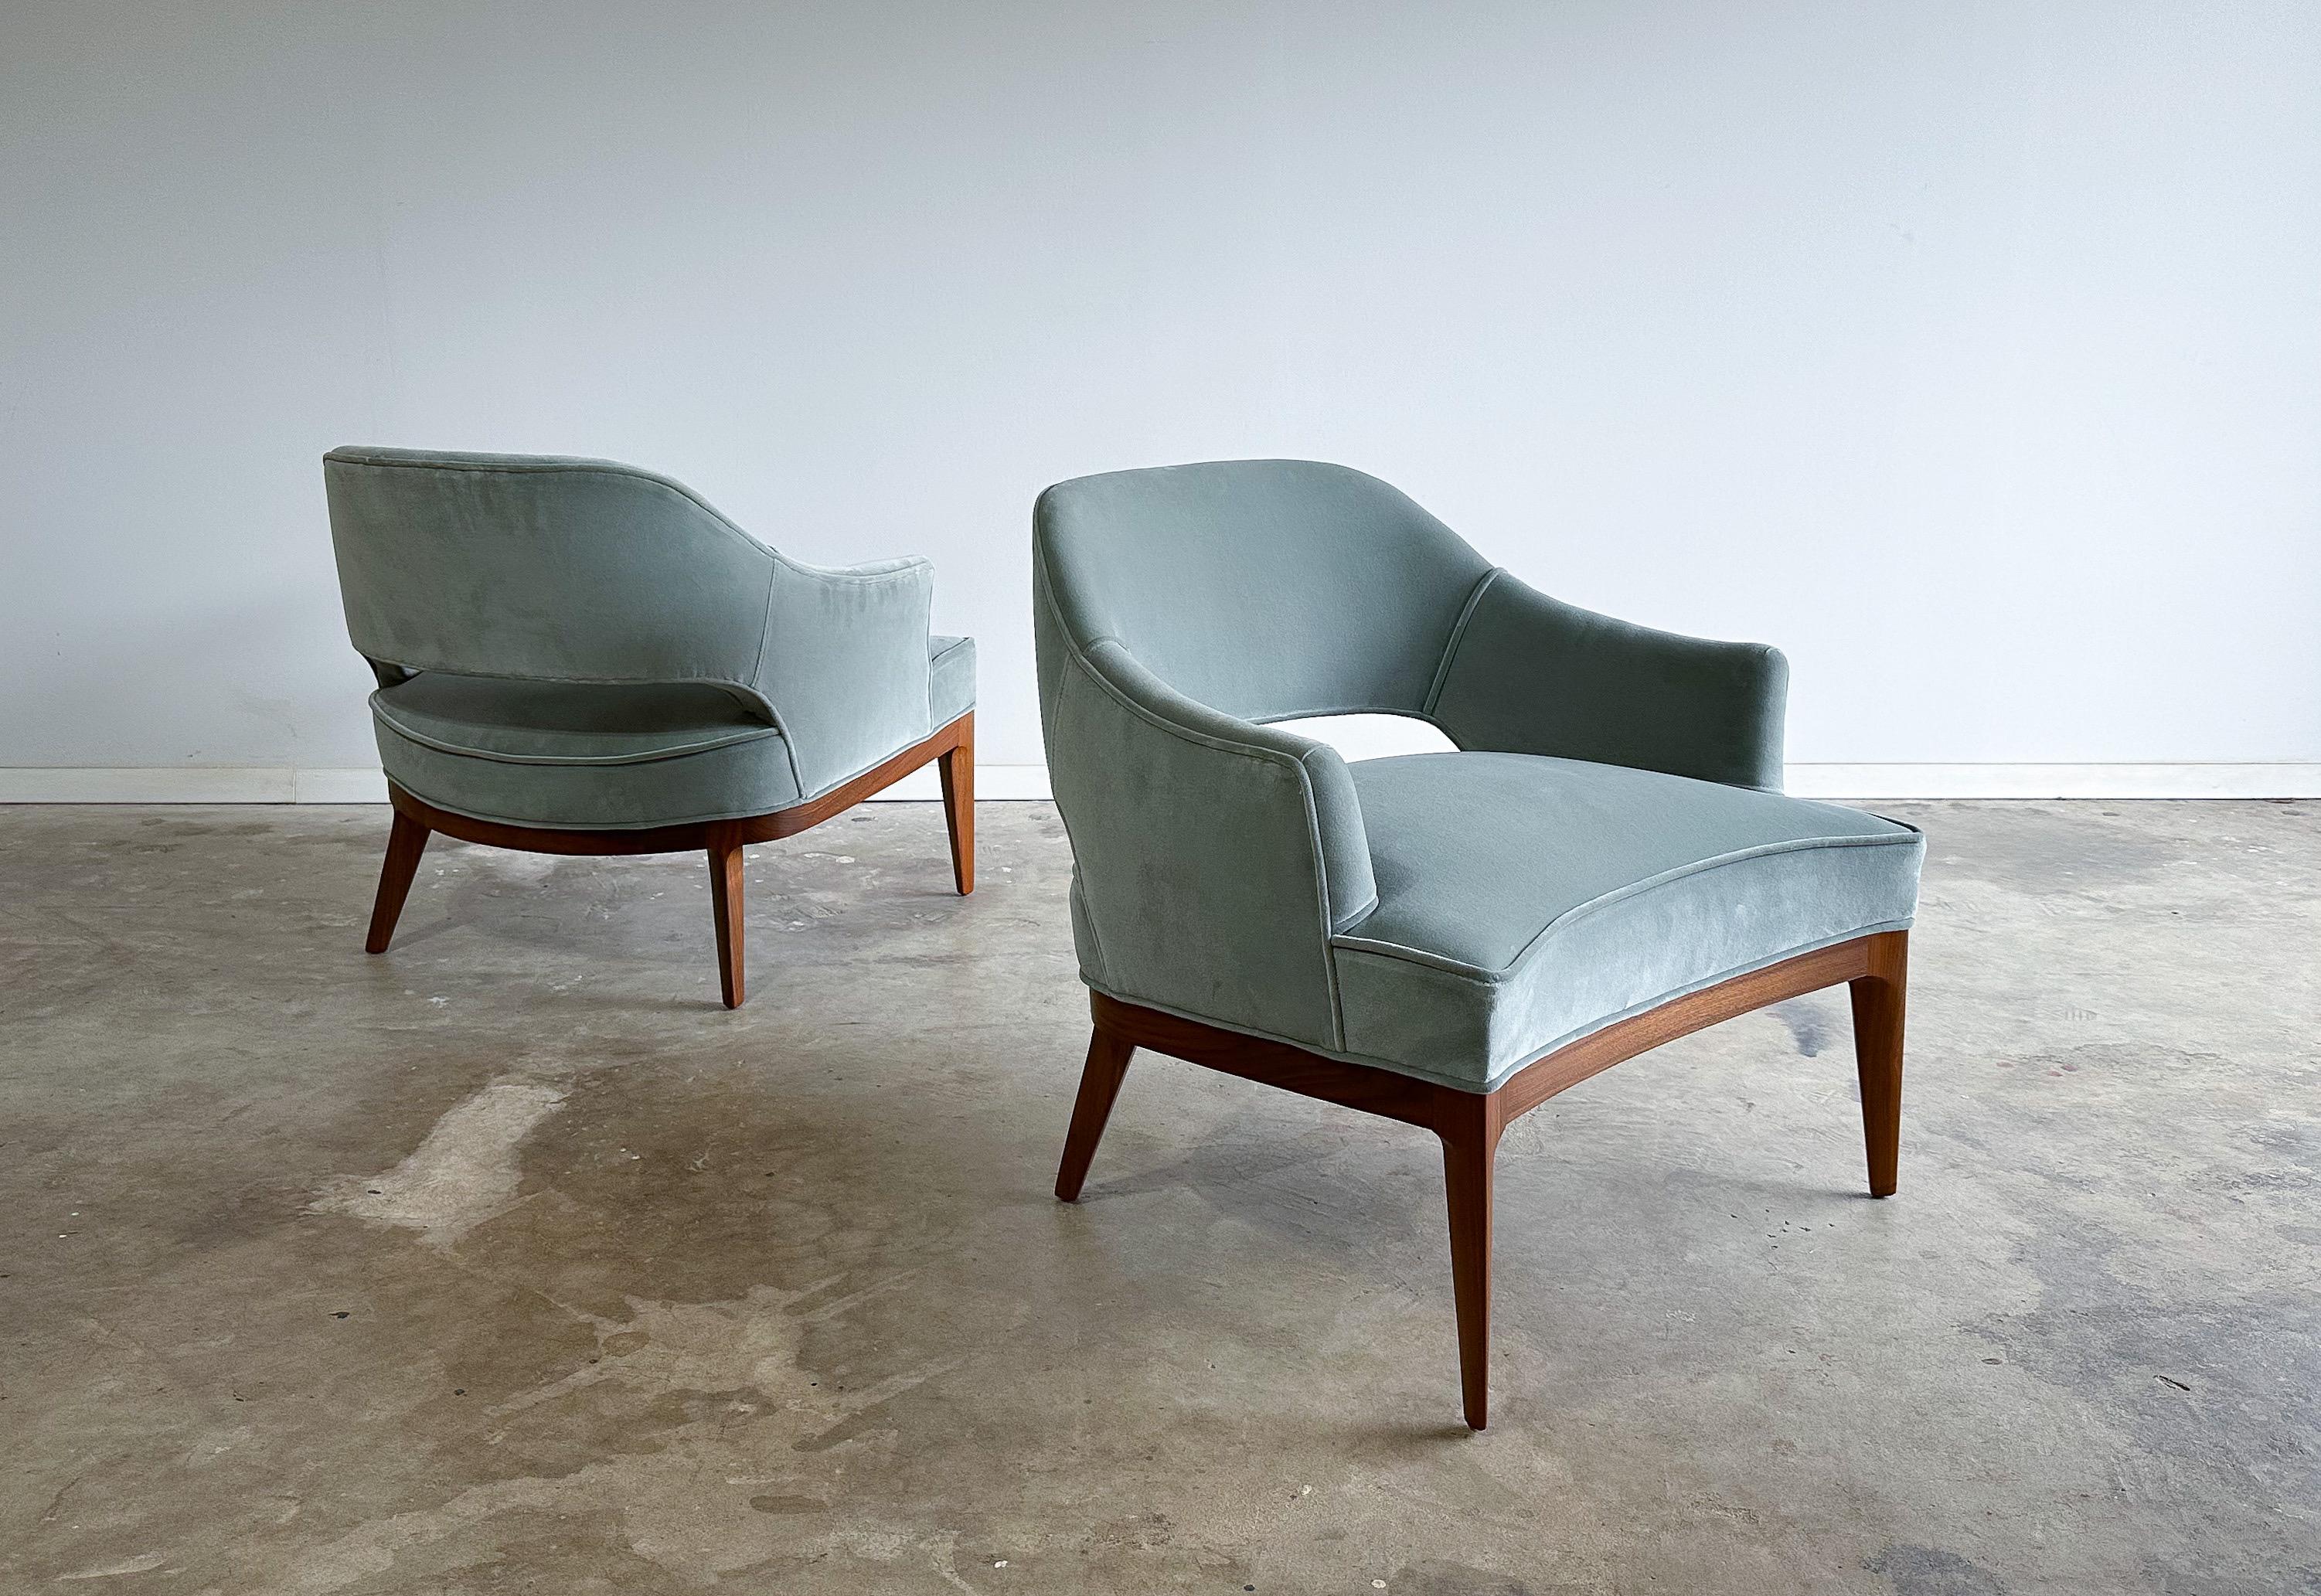 A stunning pair of mid-century modern lounge chairs attributed to Harvey Probber. 

Made by Erwin Lambeth- a company known for their high standards in quality. Featuring solid walnut frames, with highly sculpted knife edge style legs. The frames